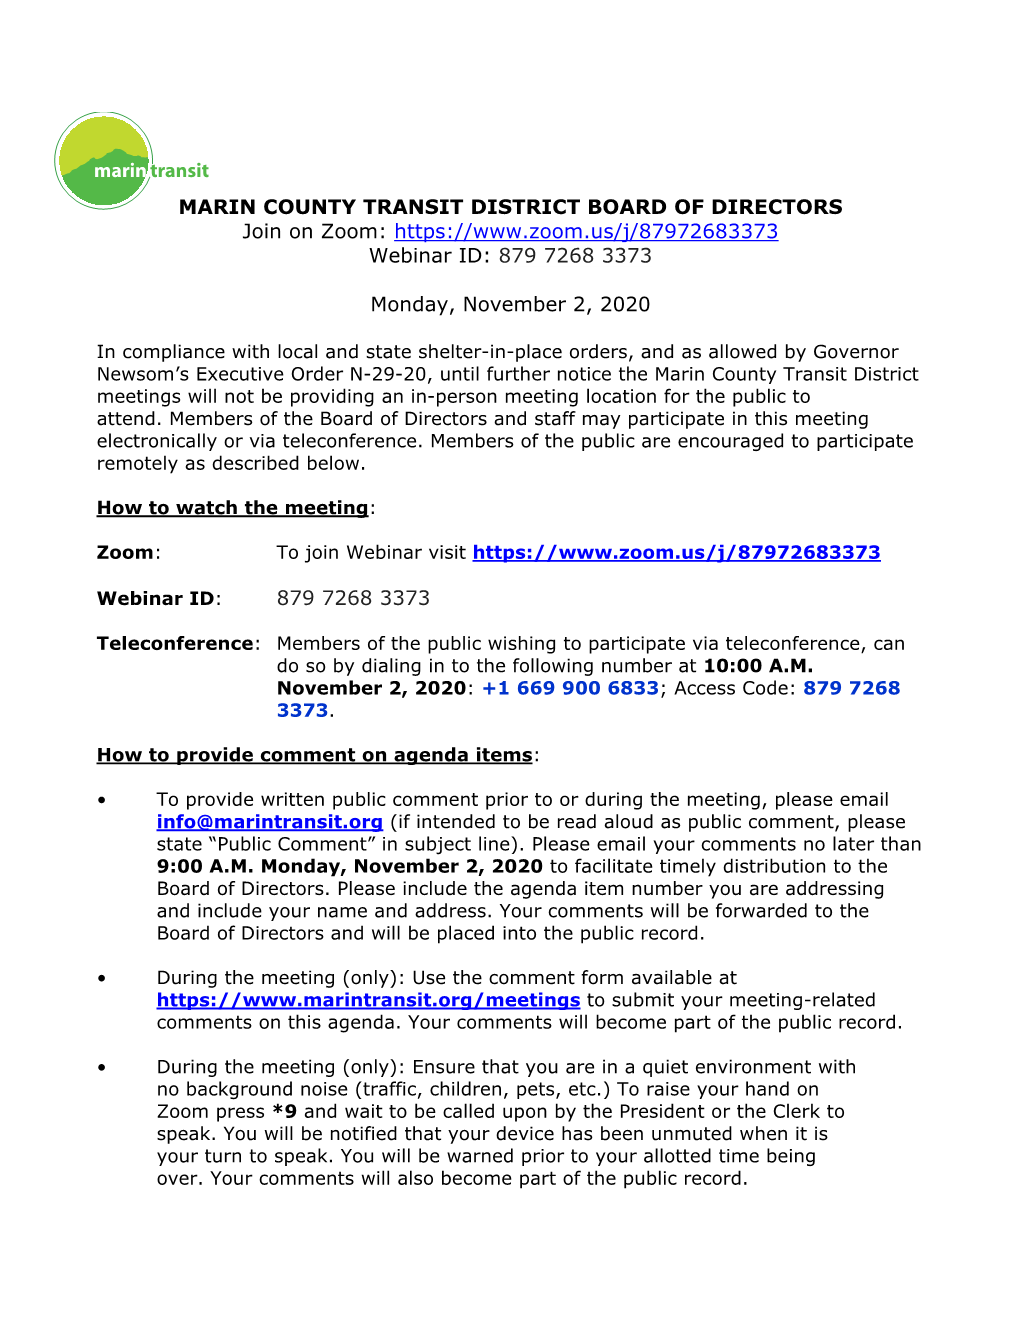 Marin County Transit District Year End FY 2019/20 Financial Report Summary